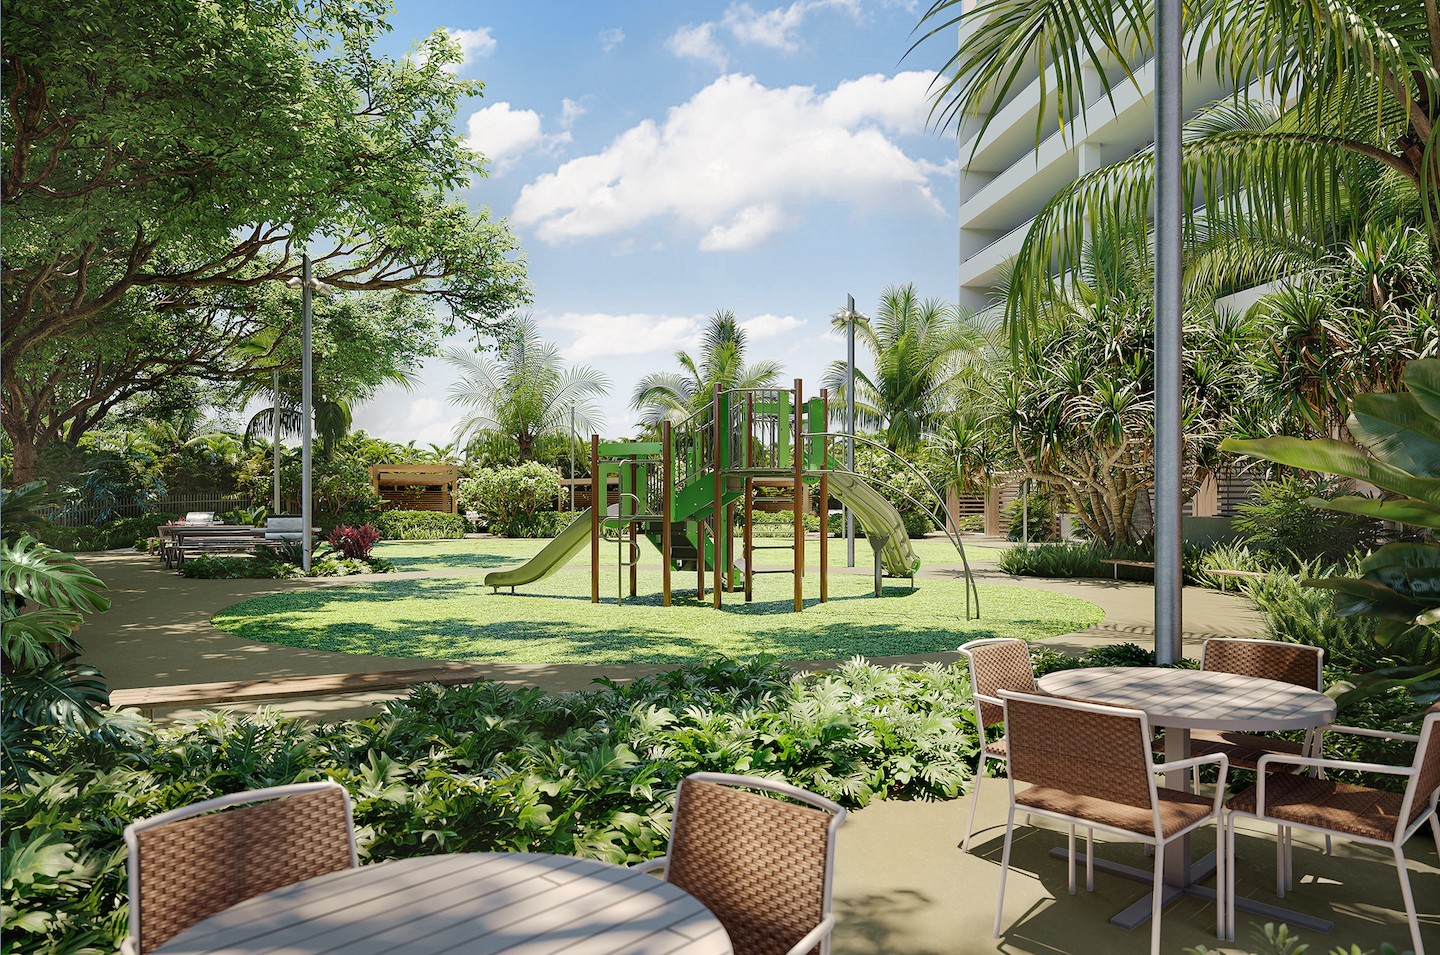 Ulana at Ward Village balances a modern aesthetic with green space and open-air recreational spaces that invite you to relax and gather with loved ones. Amenities including reservable cabanas, barbeque grills and Ulana Lawn with a children’s play area — right outside your front door. Application pick up is available at the Ulana showroom now through December 31st.